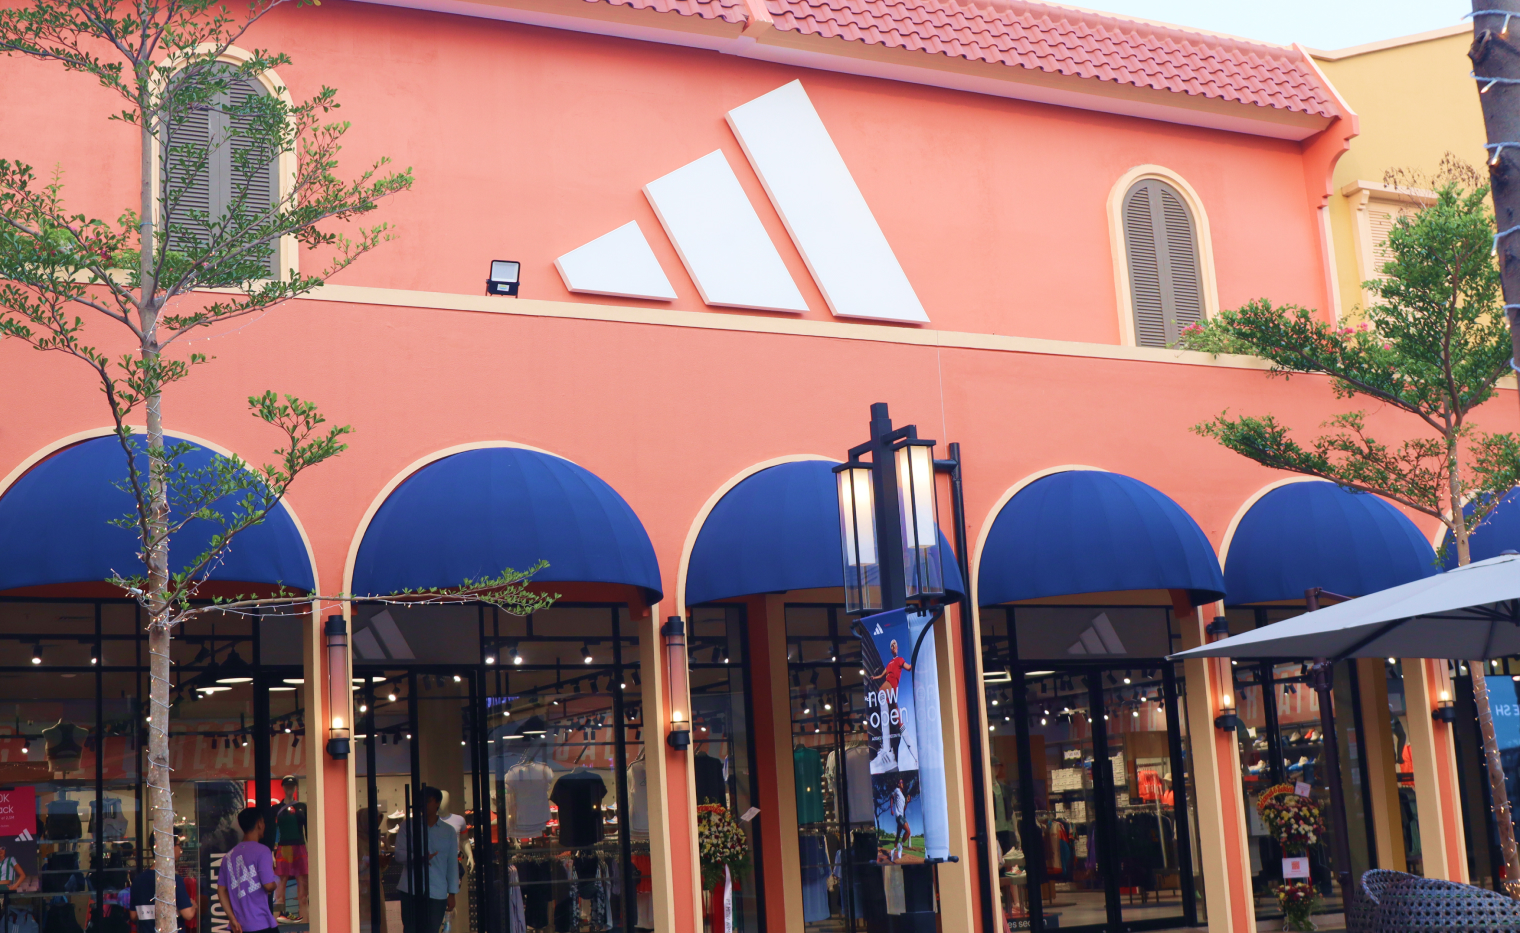 in december 2023, AdidAs will Be AvAilAble At summArecon villAggio outlets